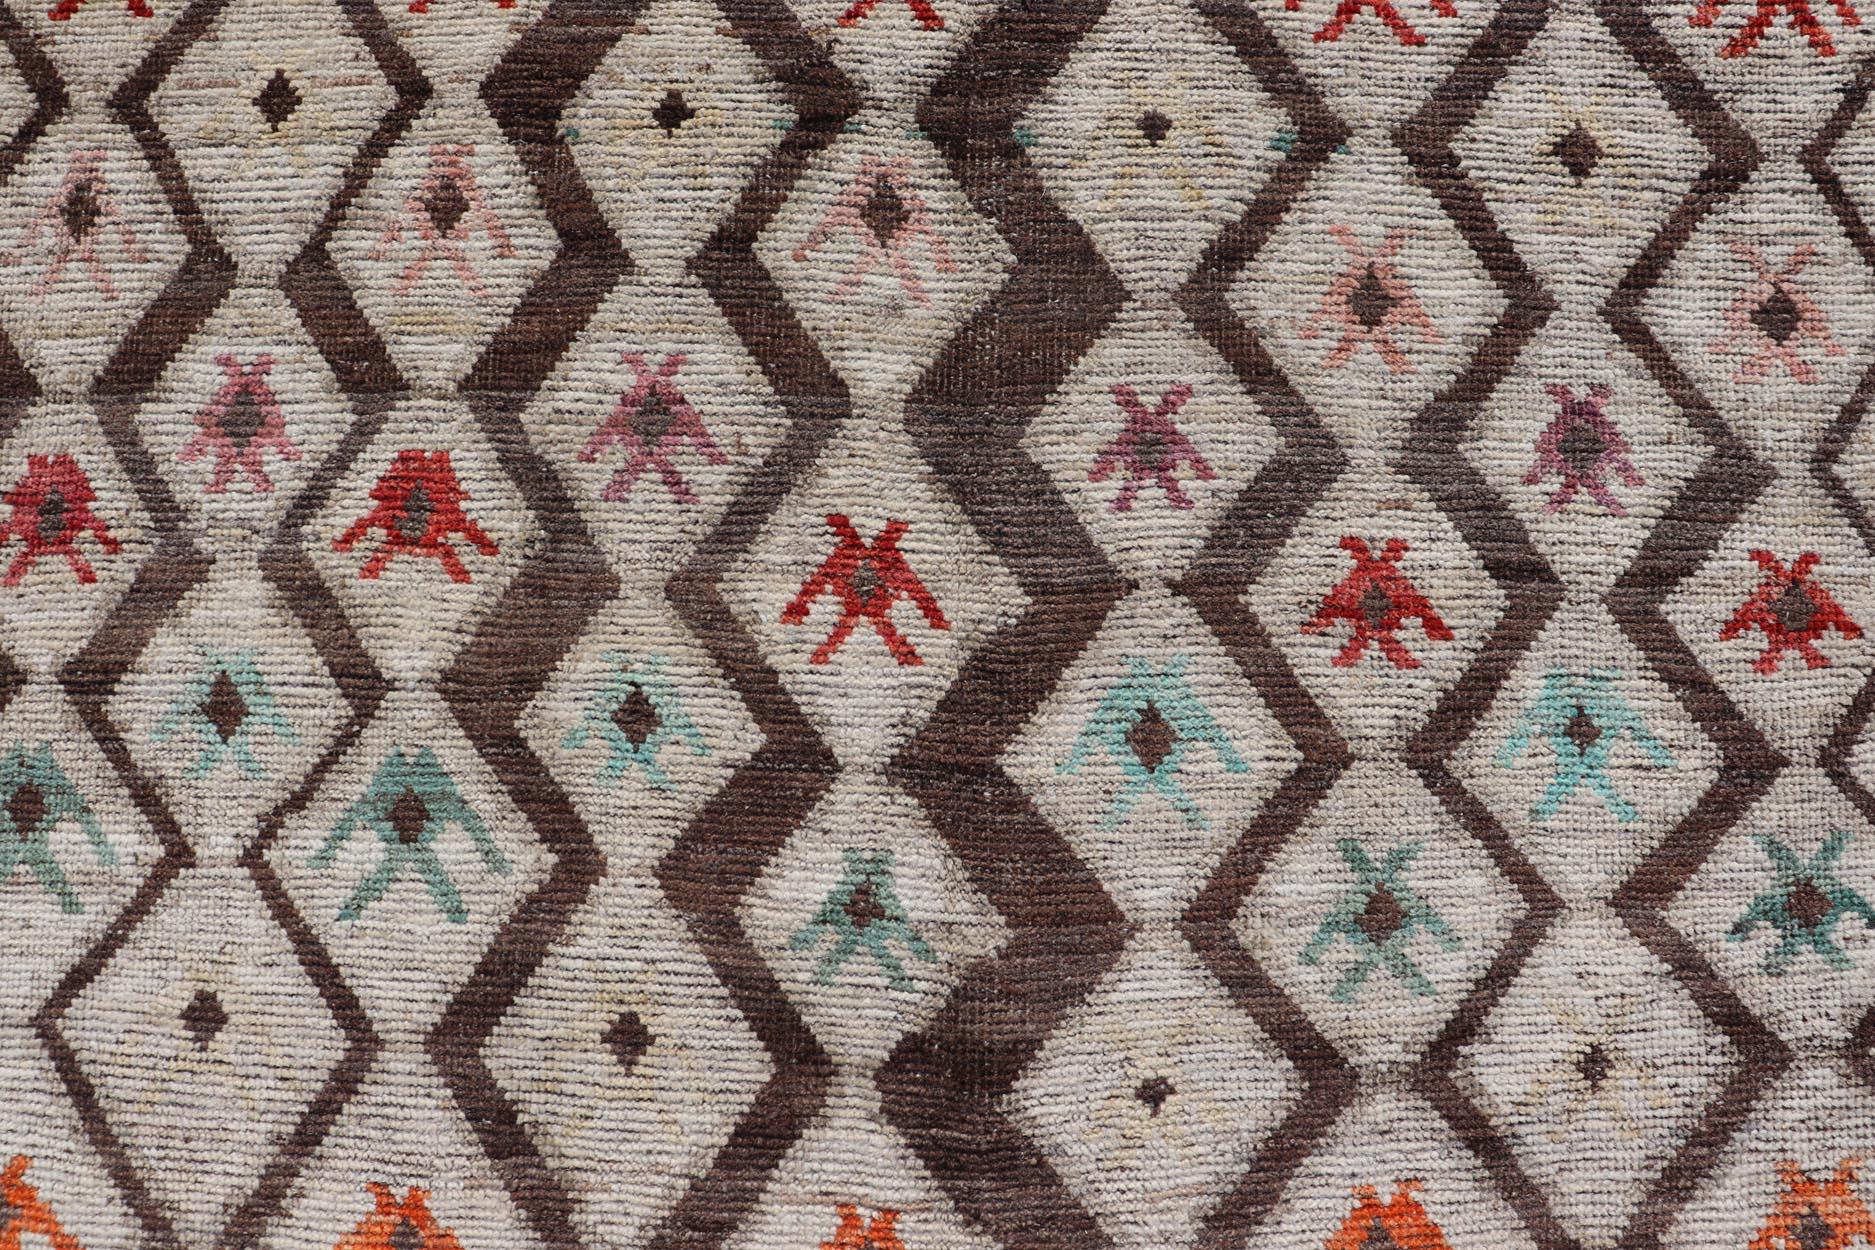 This modern casual tribal rug has been hand-knotted. The rug features a modern all-over sub-geometric diamond design, replete with various motifs in multicolor, making this rug a superb fit for a variety of classic, modern, casual and minimalist